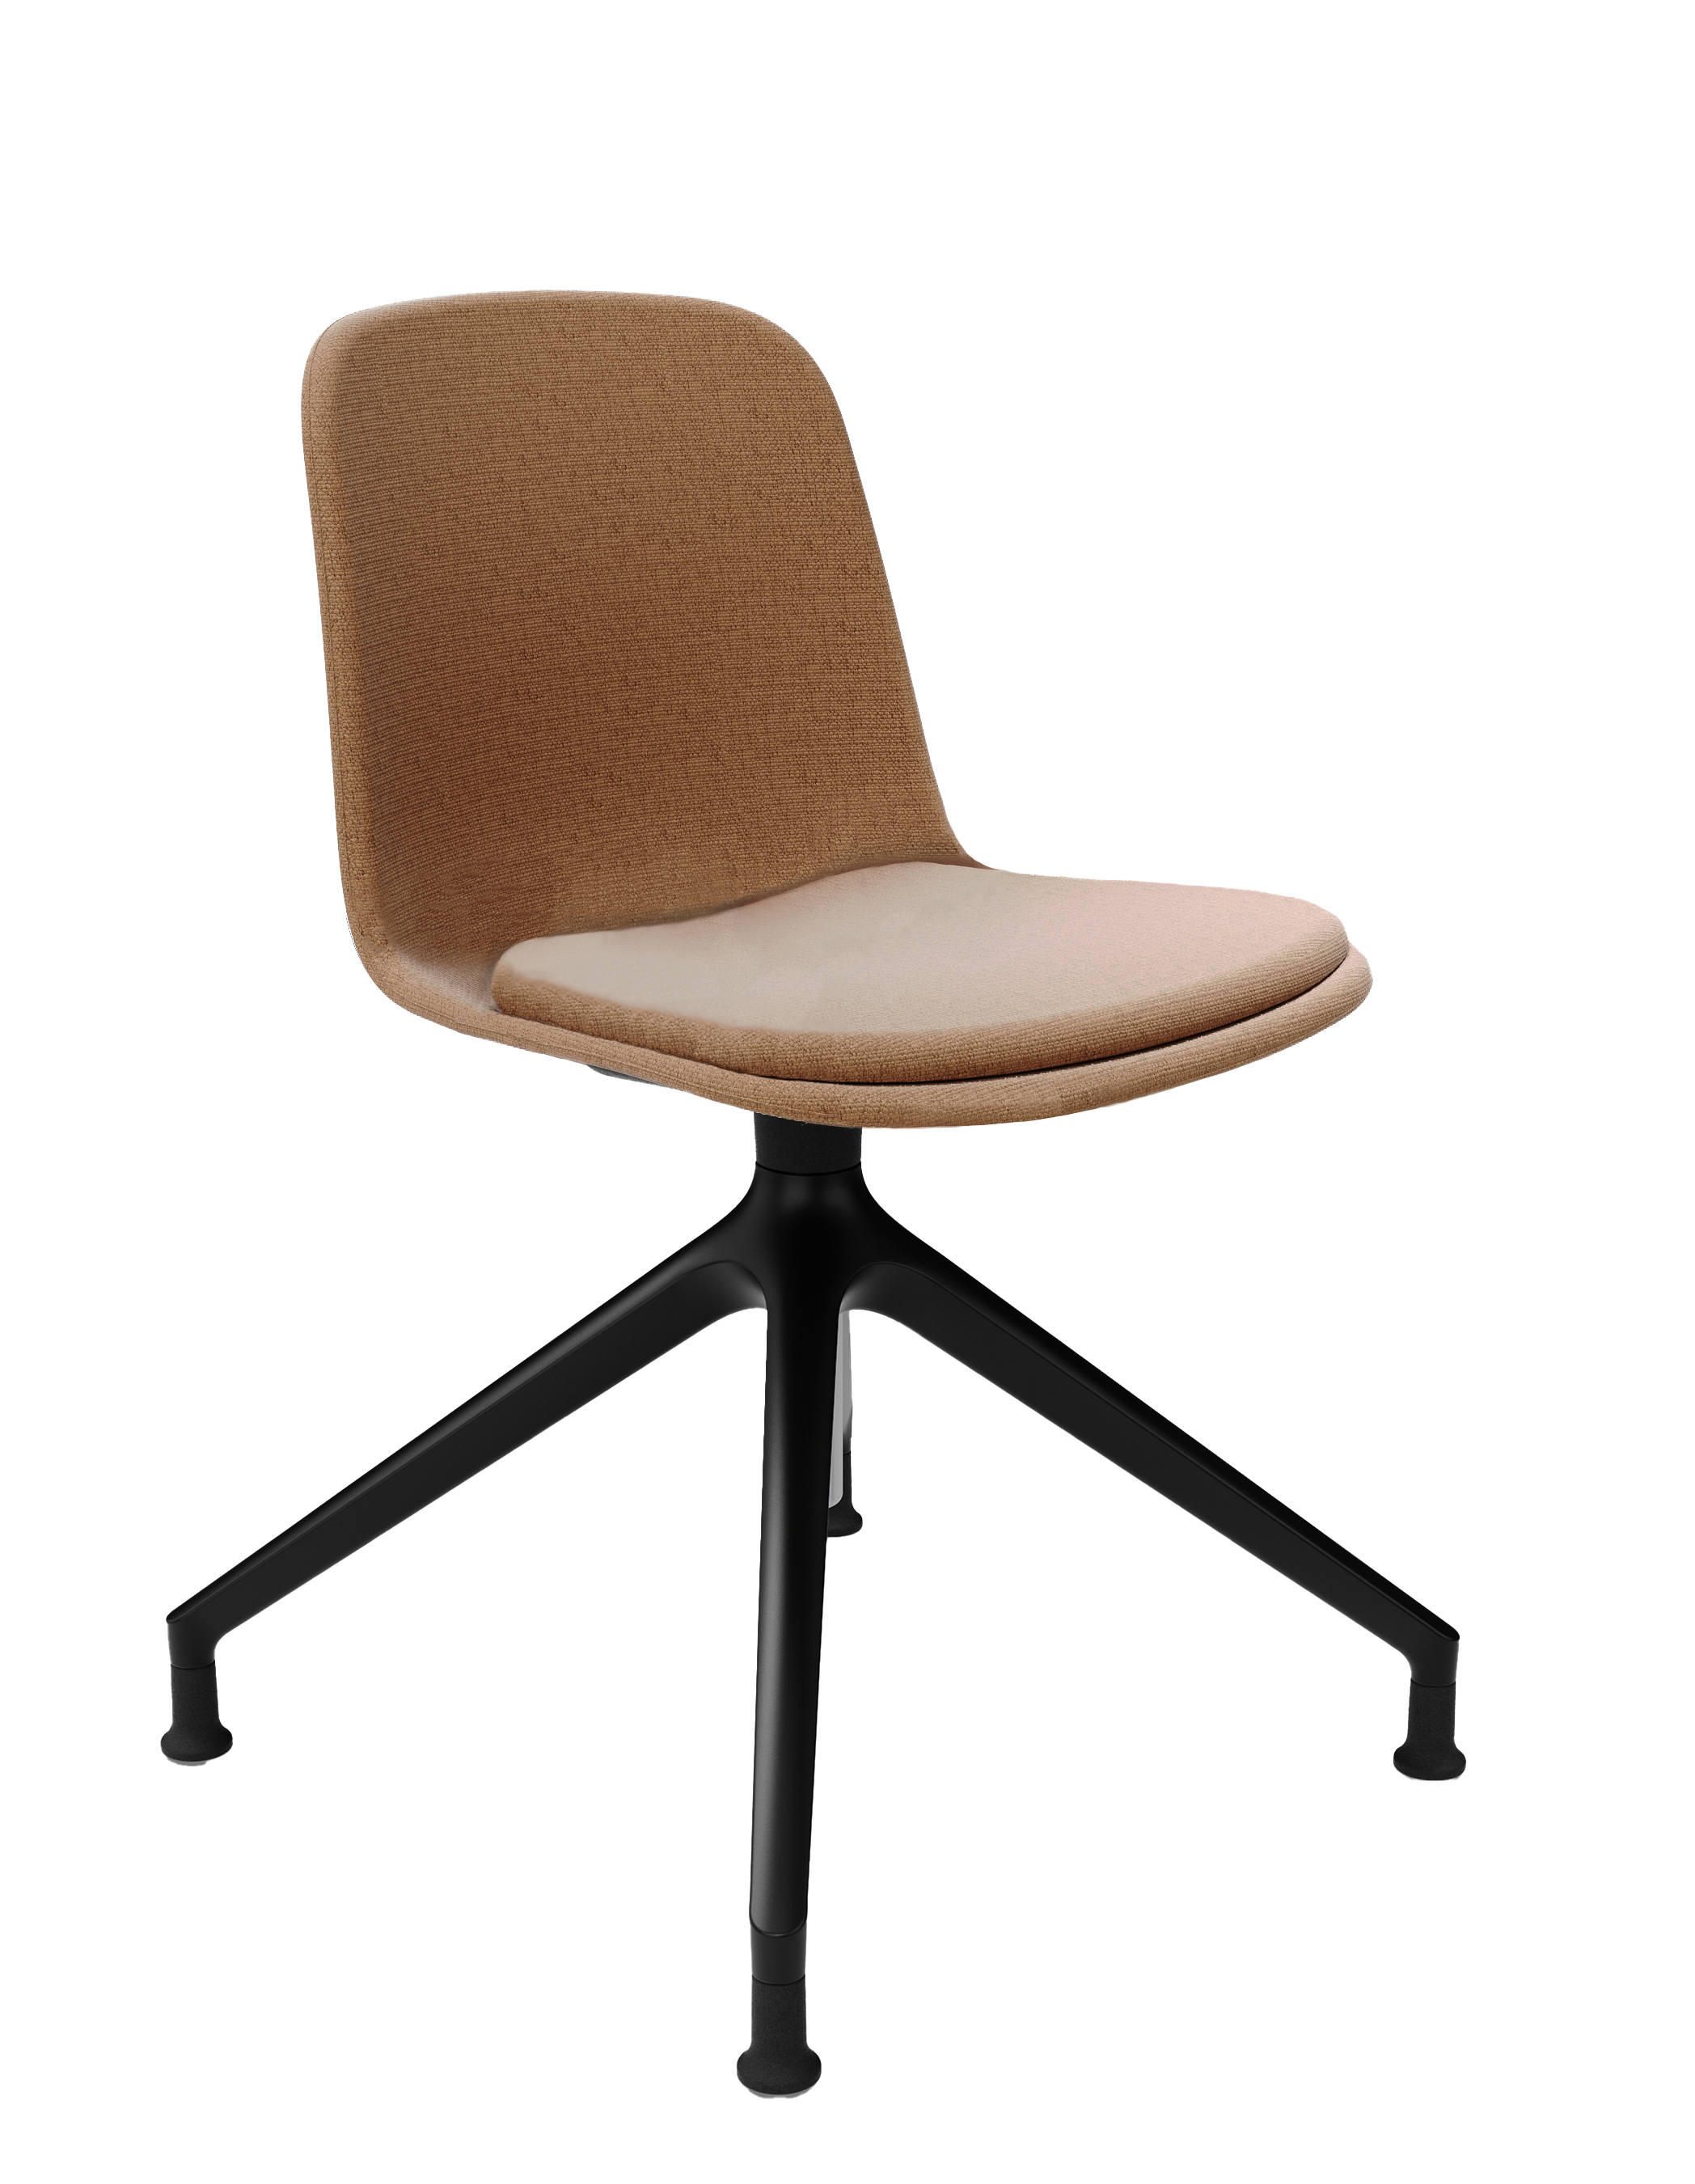 WS - Moto Side Chair Upholstered - 4-star base - Front Angle